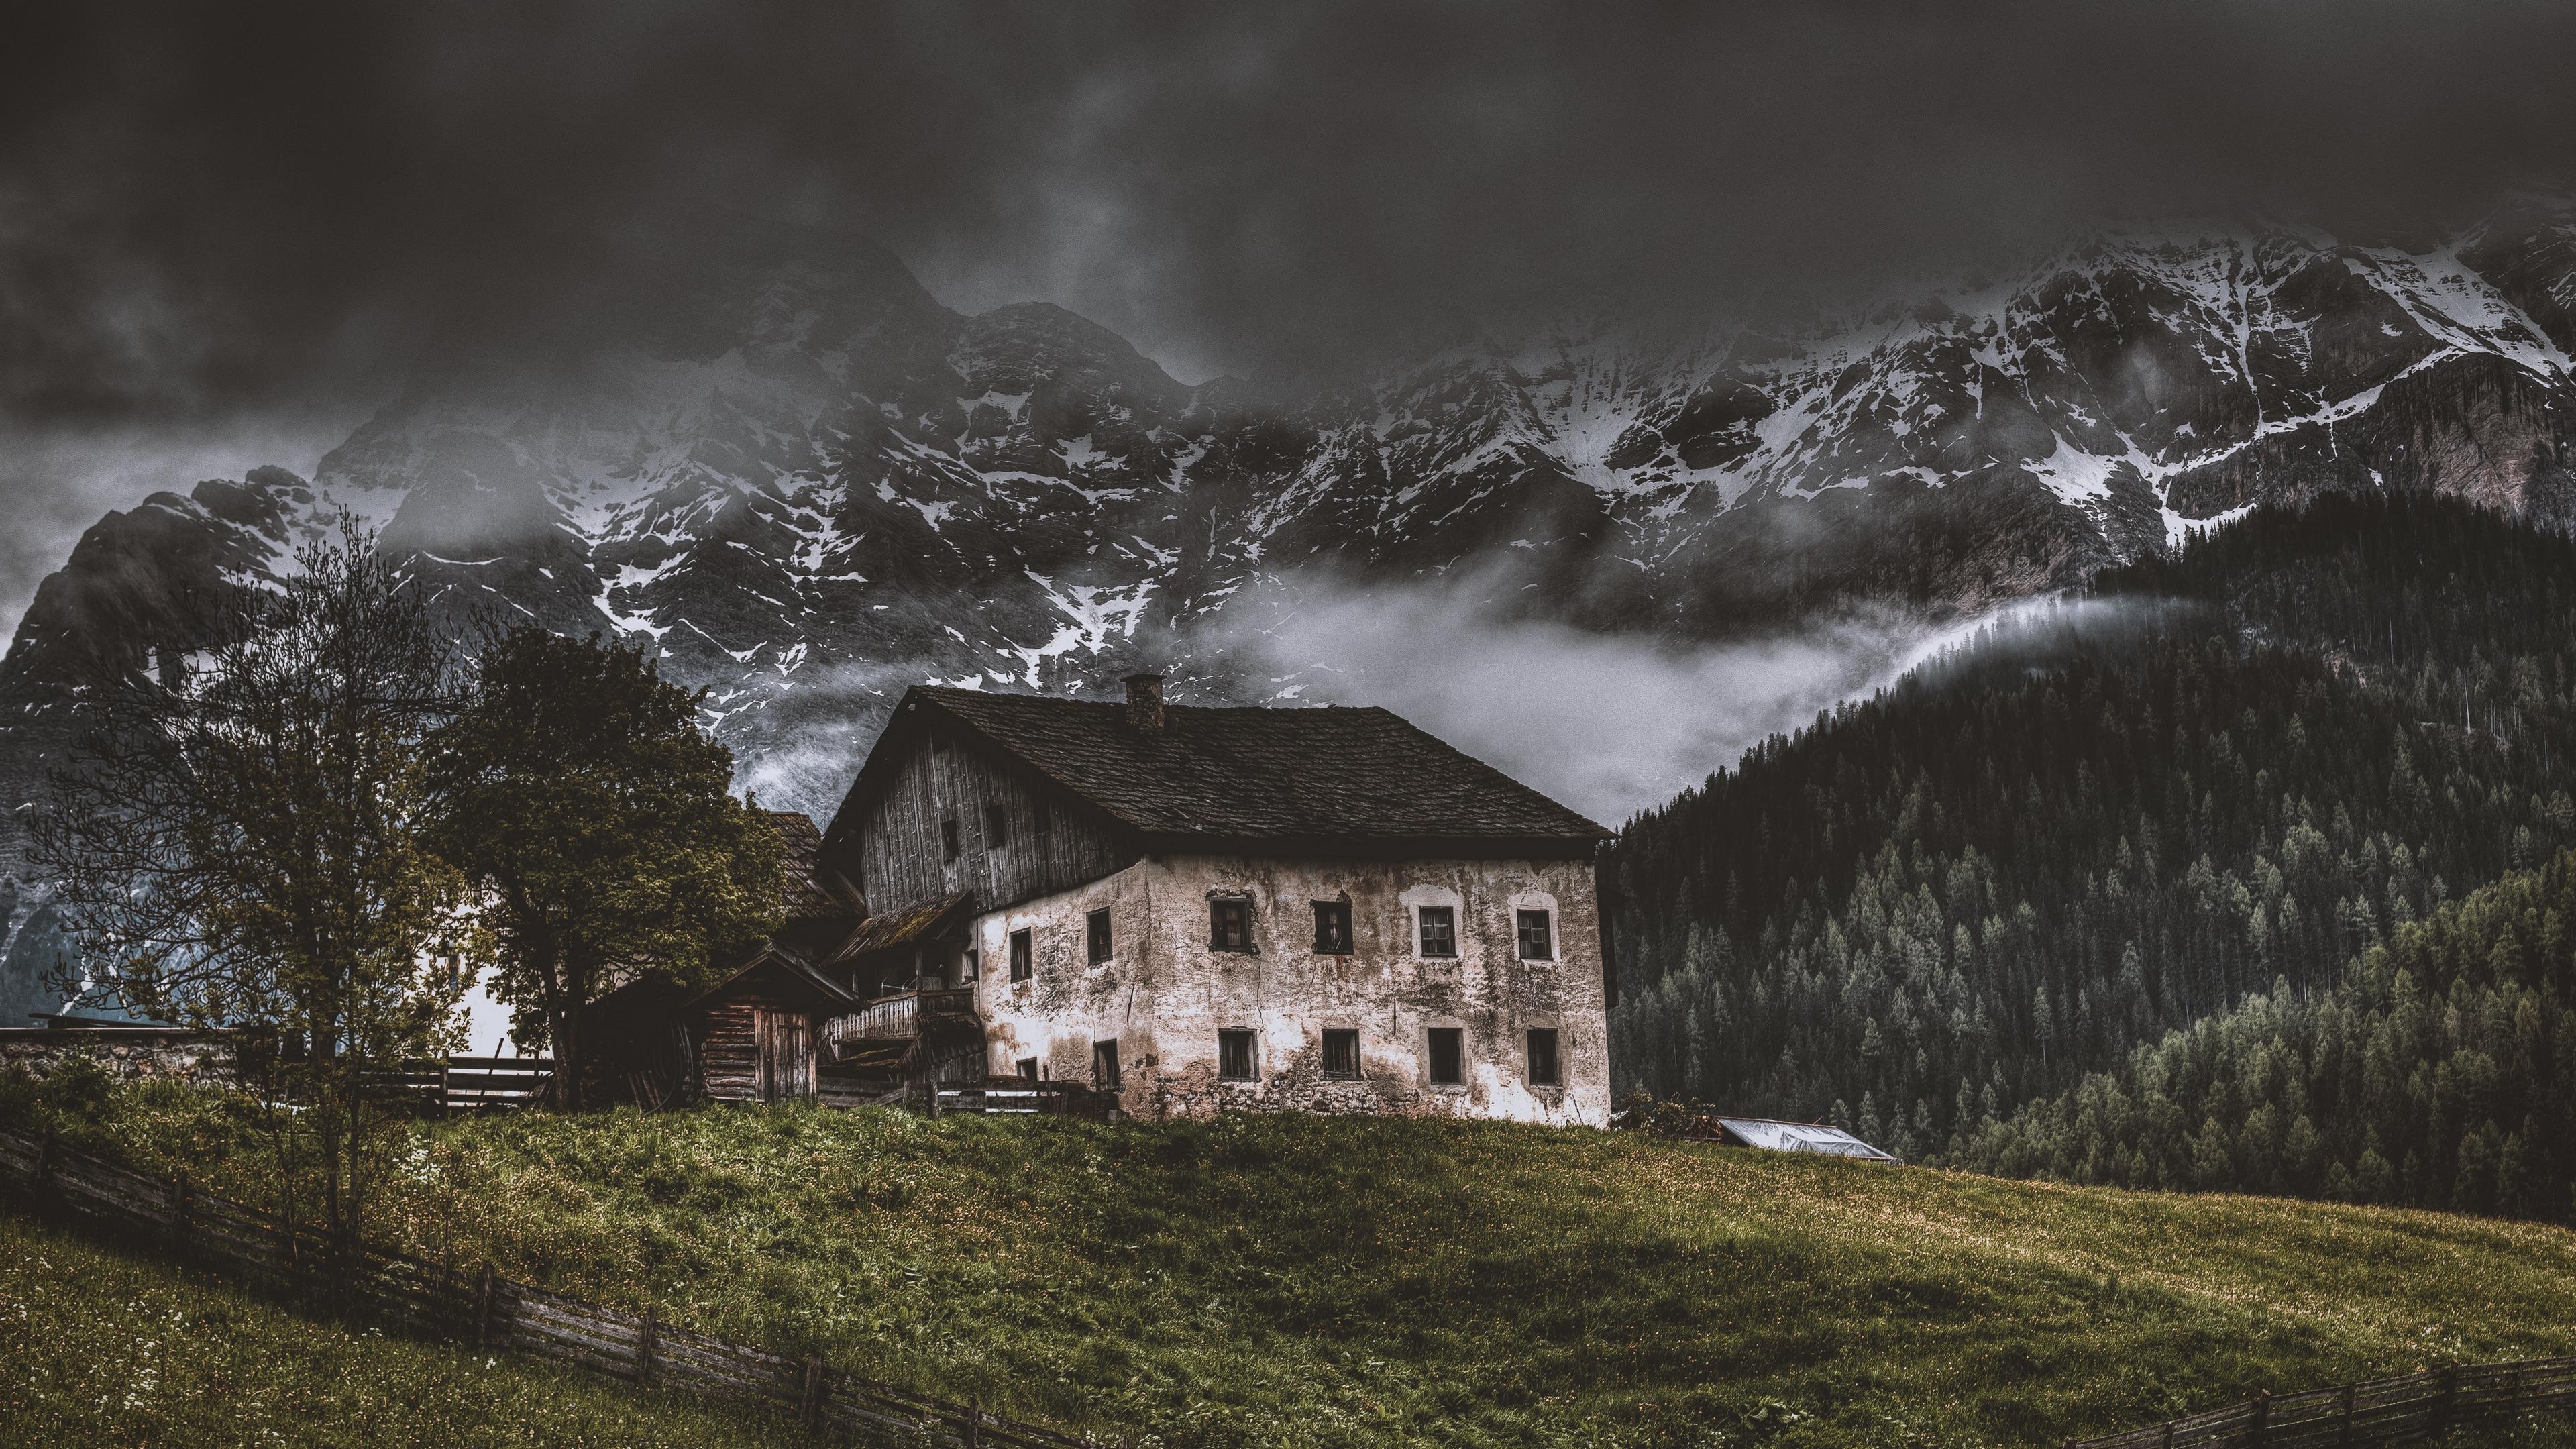 Download wallpaper 3840x2160 mountains, house, old, solitude, grass